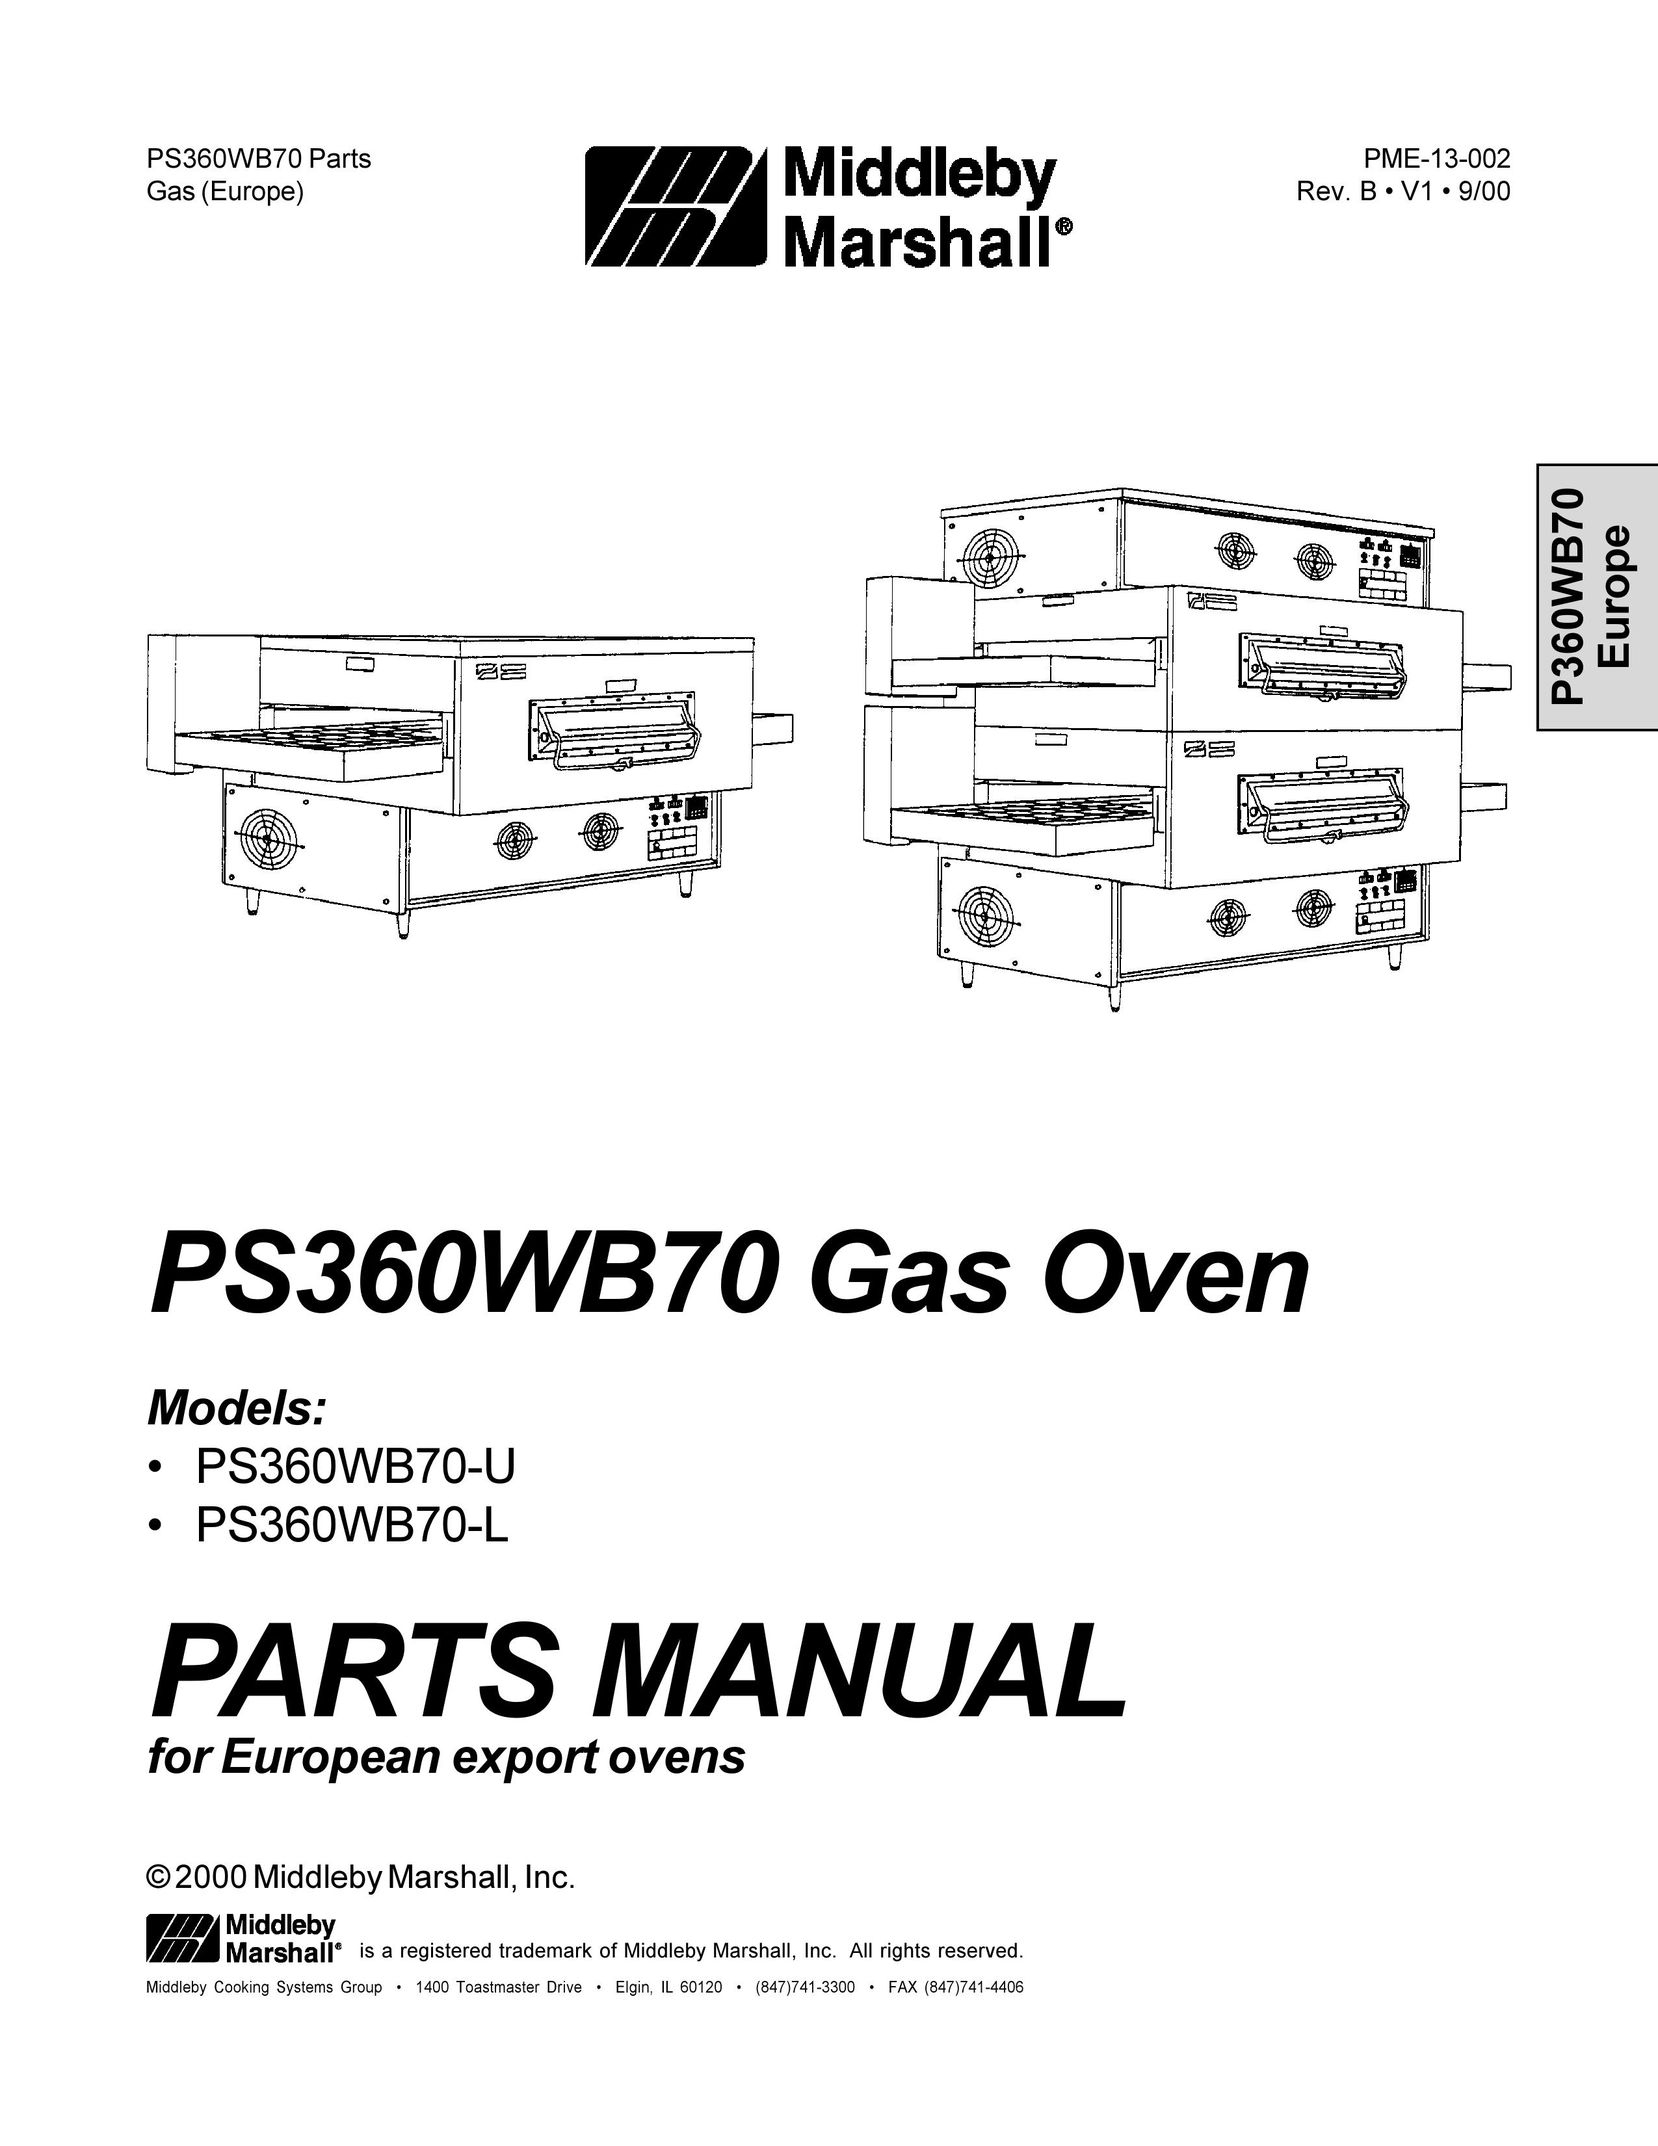 Middleby Cooking Systems Group PS360WB70-L Oven User Manual